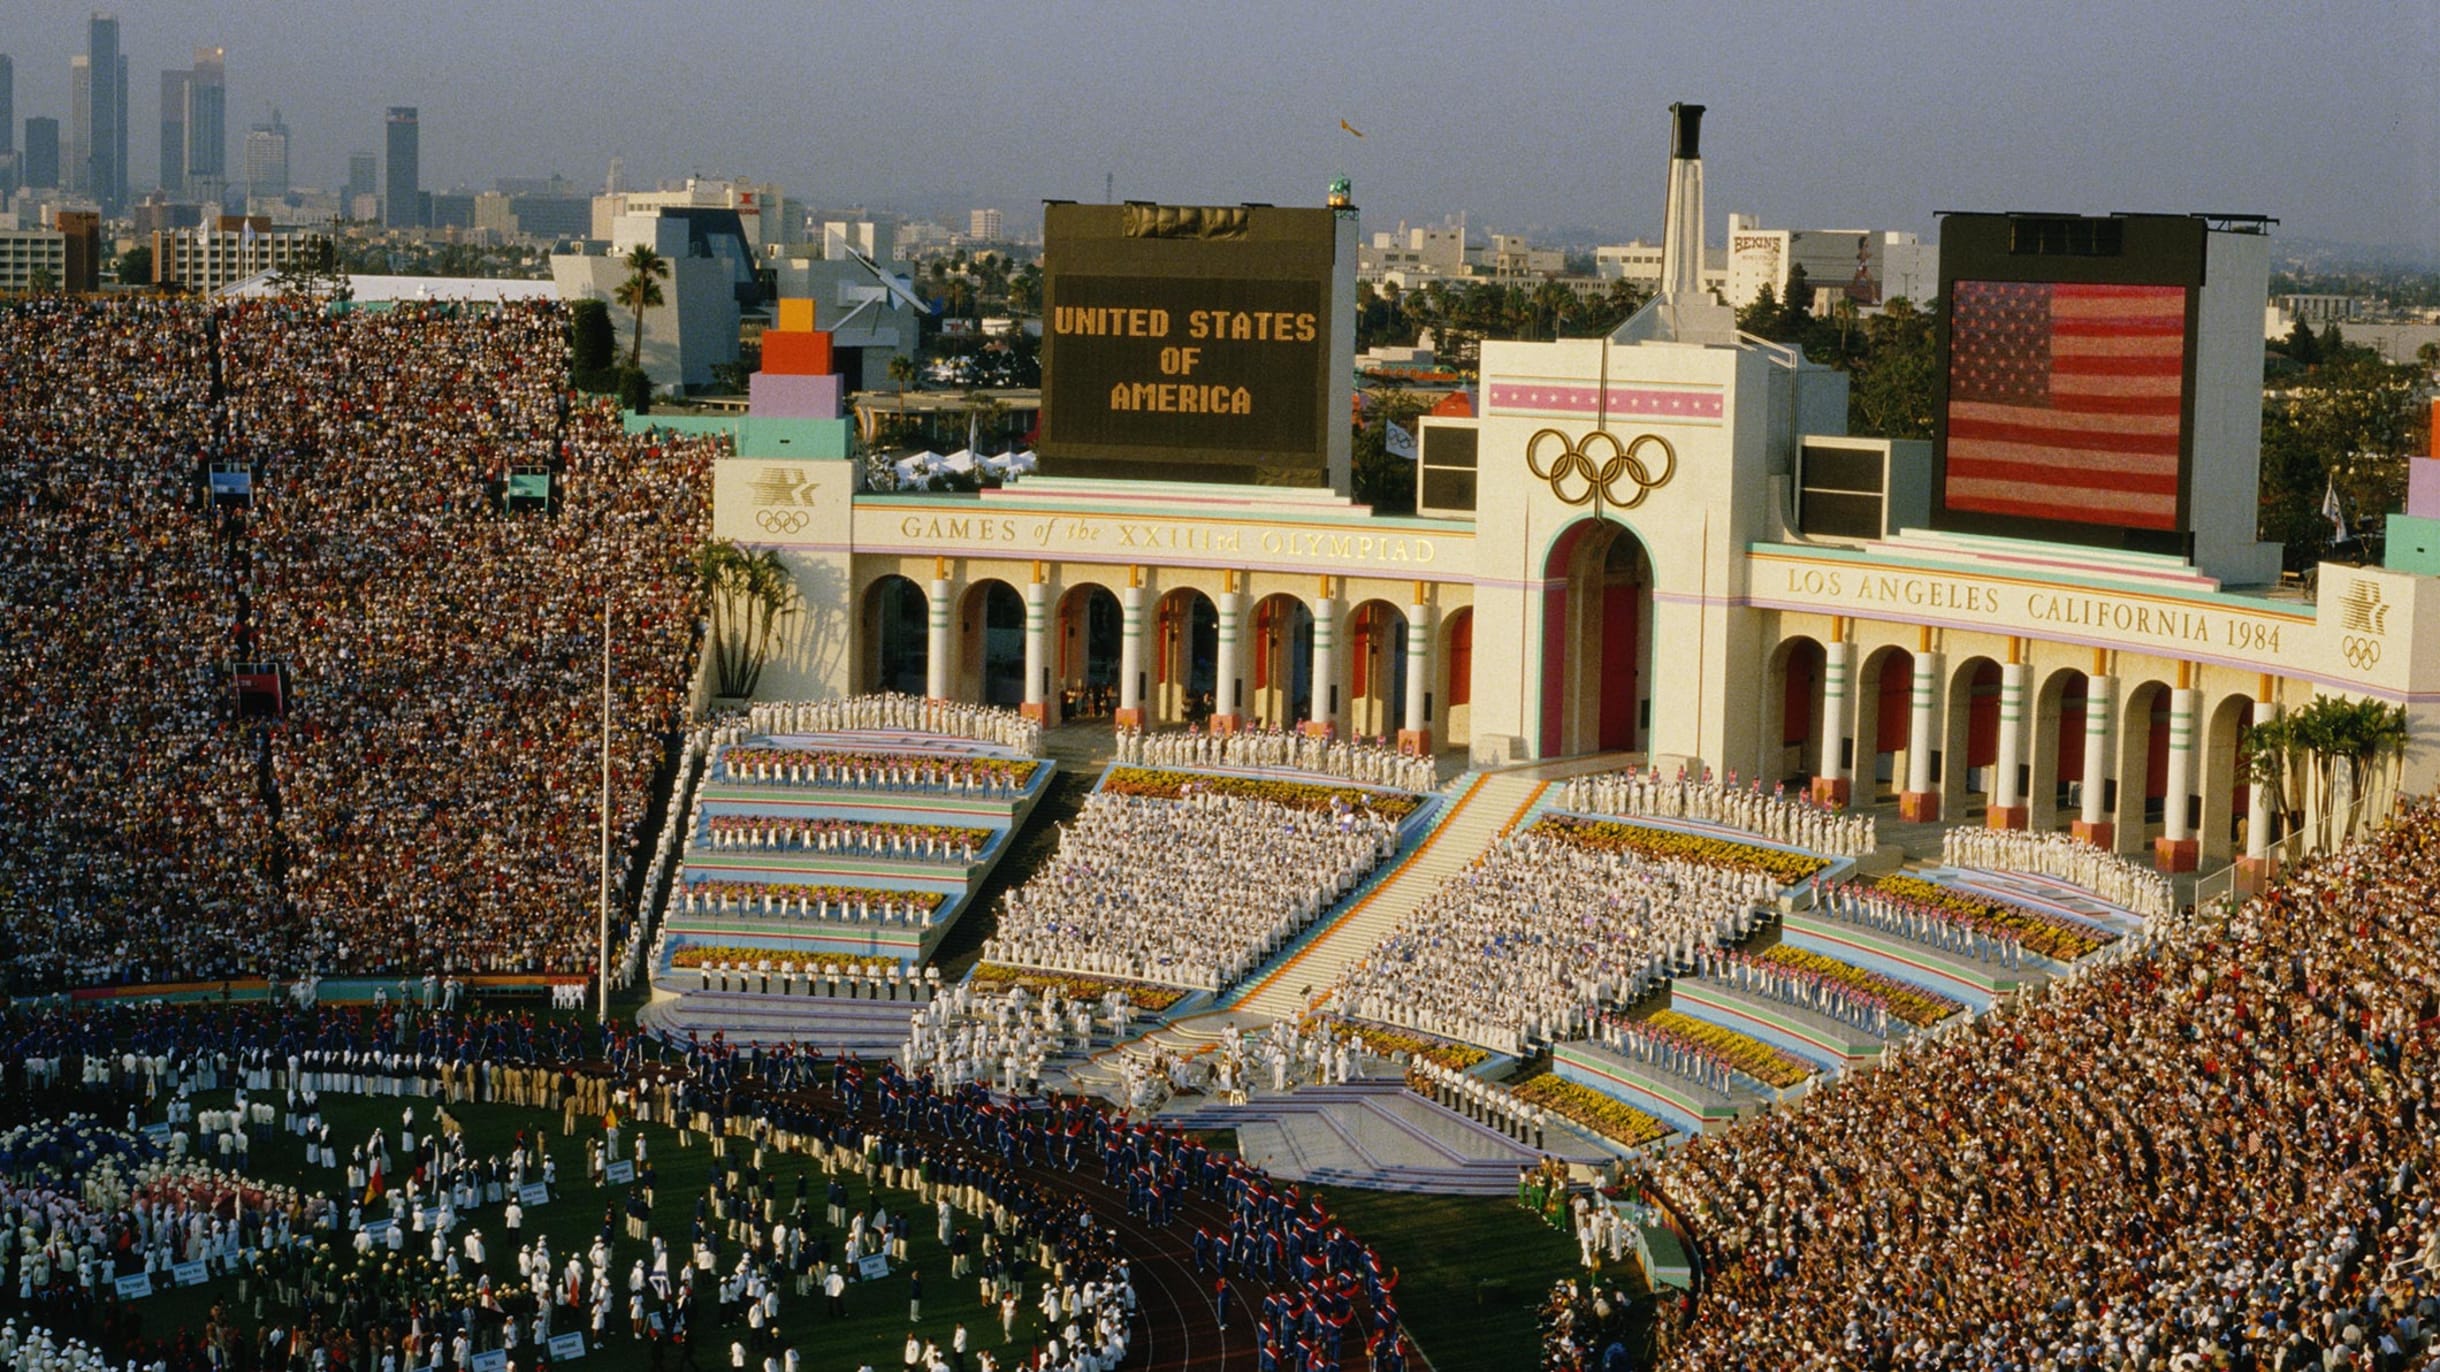 Los Angeles 1932: California welcomes the world - Olympic News